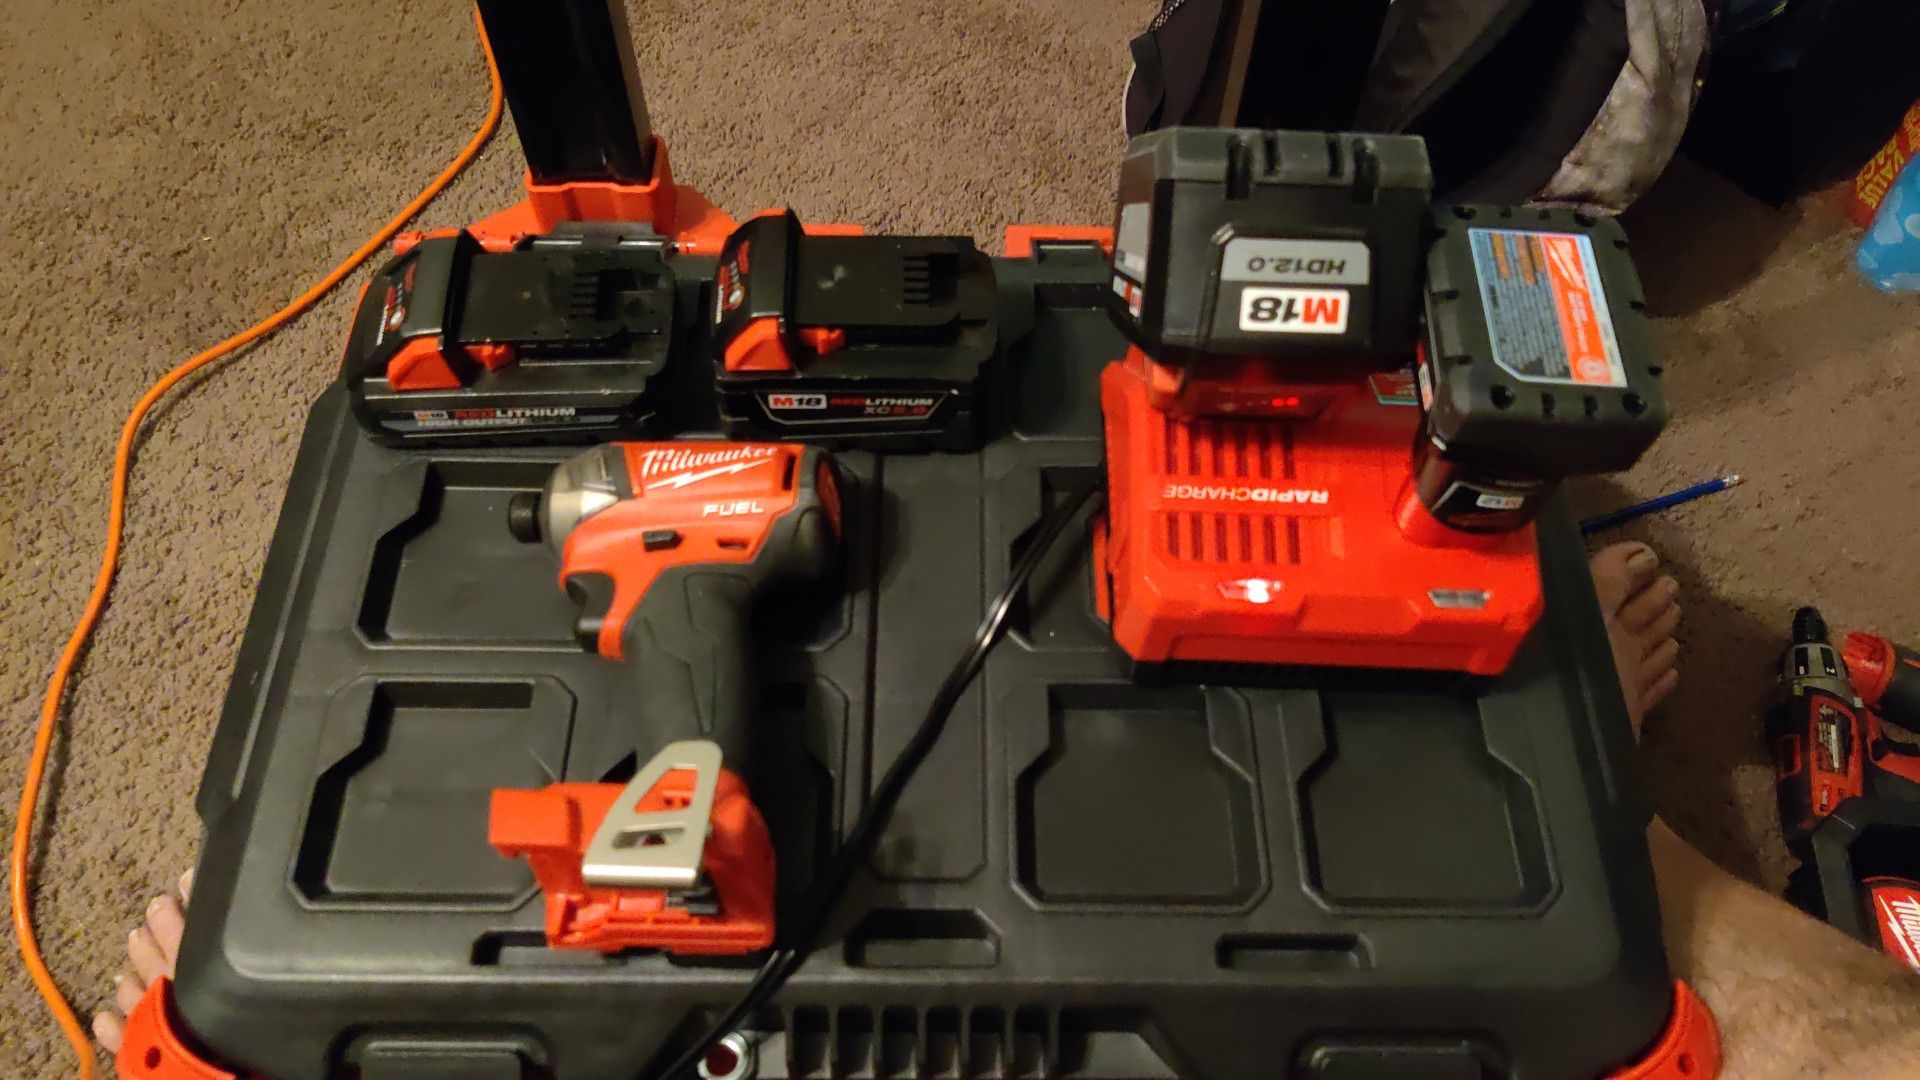 MILWAUKEE IMPACT SET. 3 BATTERIES AND RAPID CHARGER. WILL SELL THE PACKOUT BOX ALSO